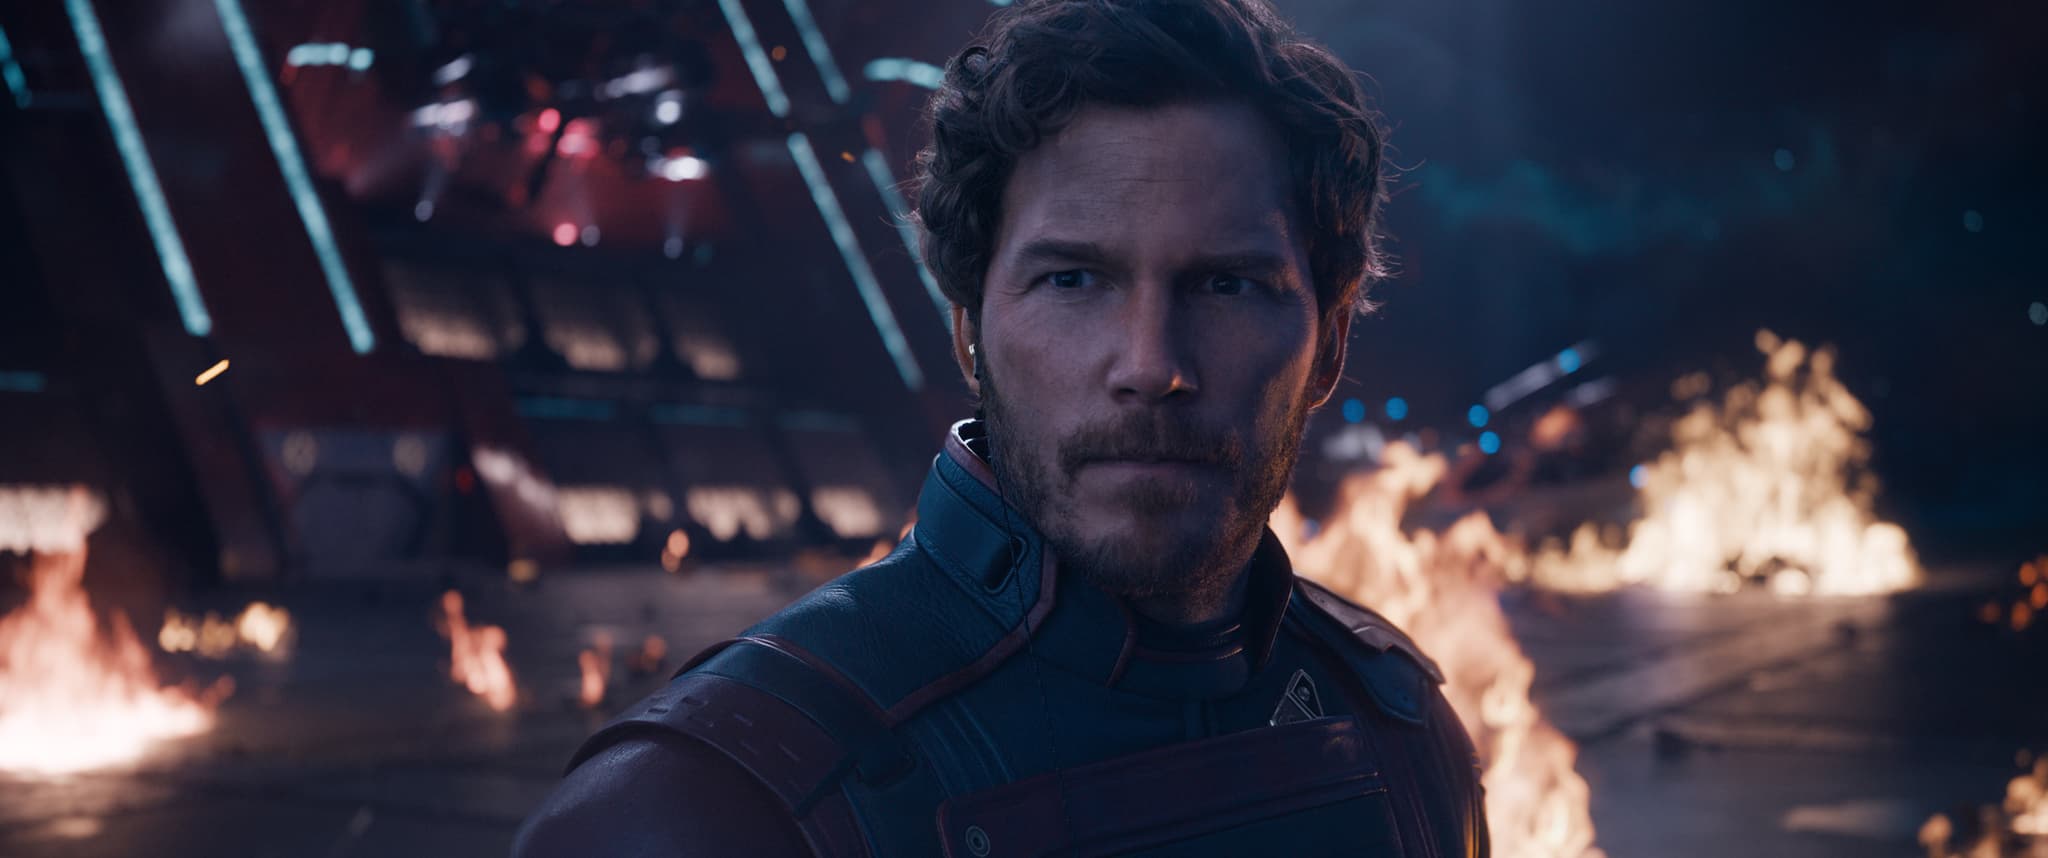 Peter Quill always looks somewhere between confused and angry.